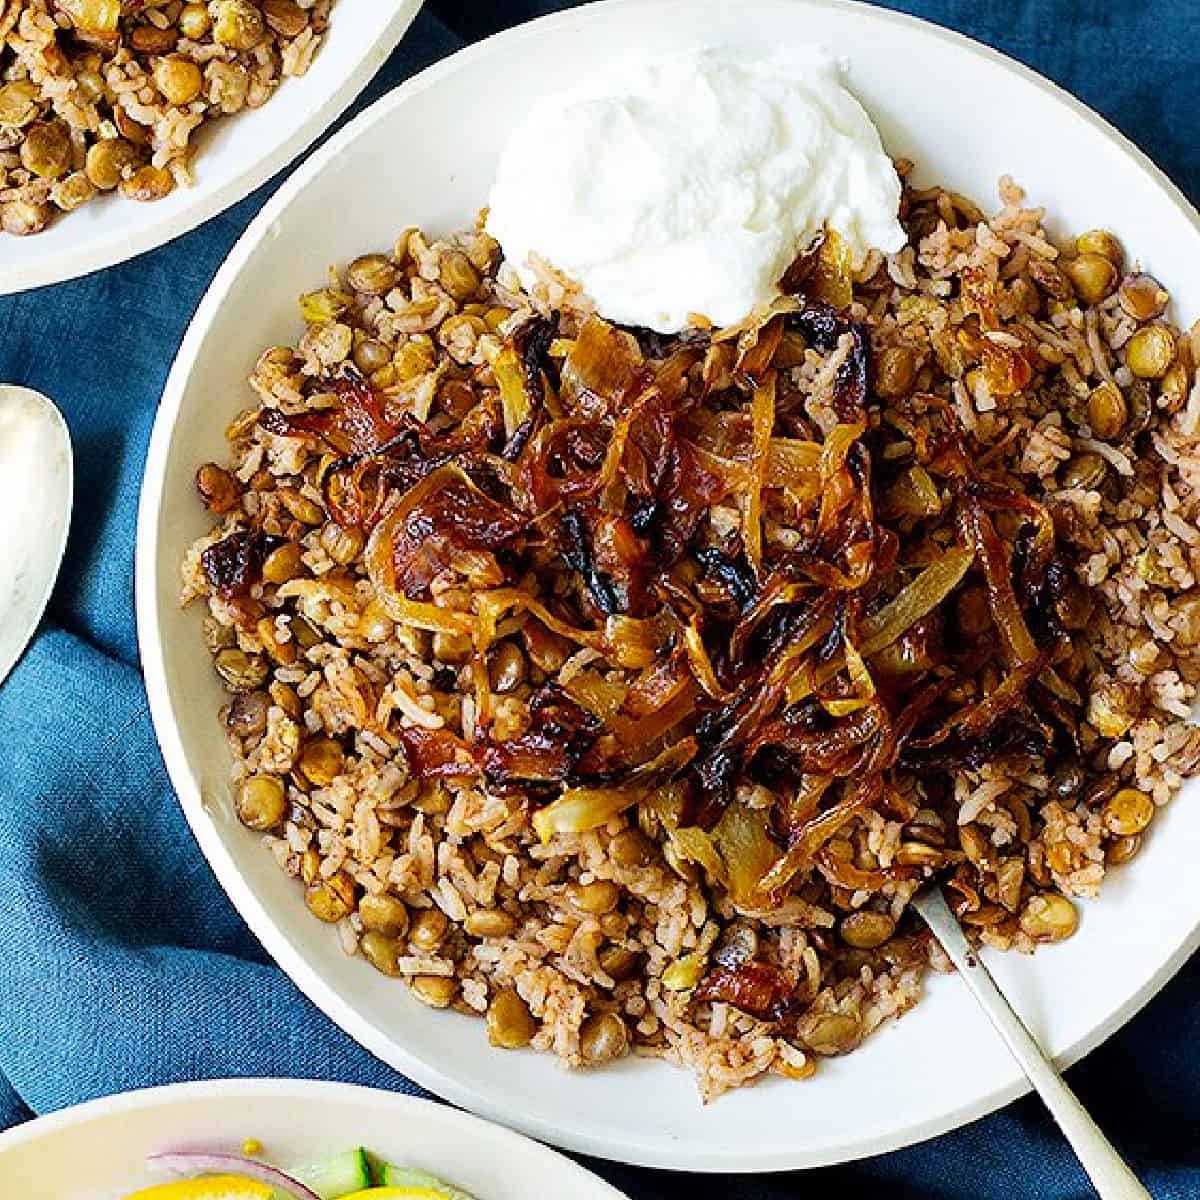 Mujadara is a simple Lebanese lentil and rice dish with crispy onions that's packed with flavor. This lentils and rice recipe calls for only a few ingredients and is very easy to make.
